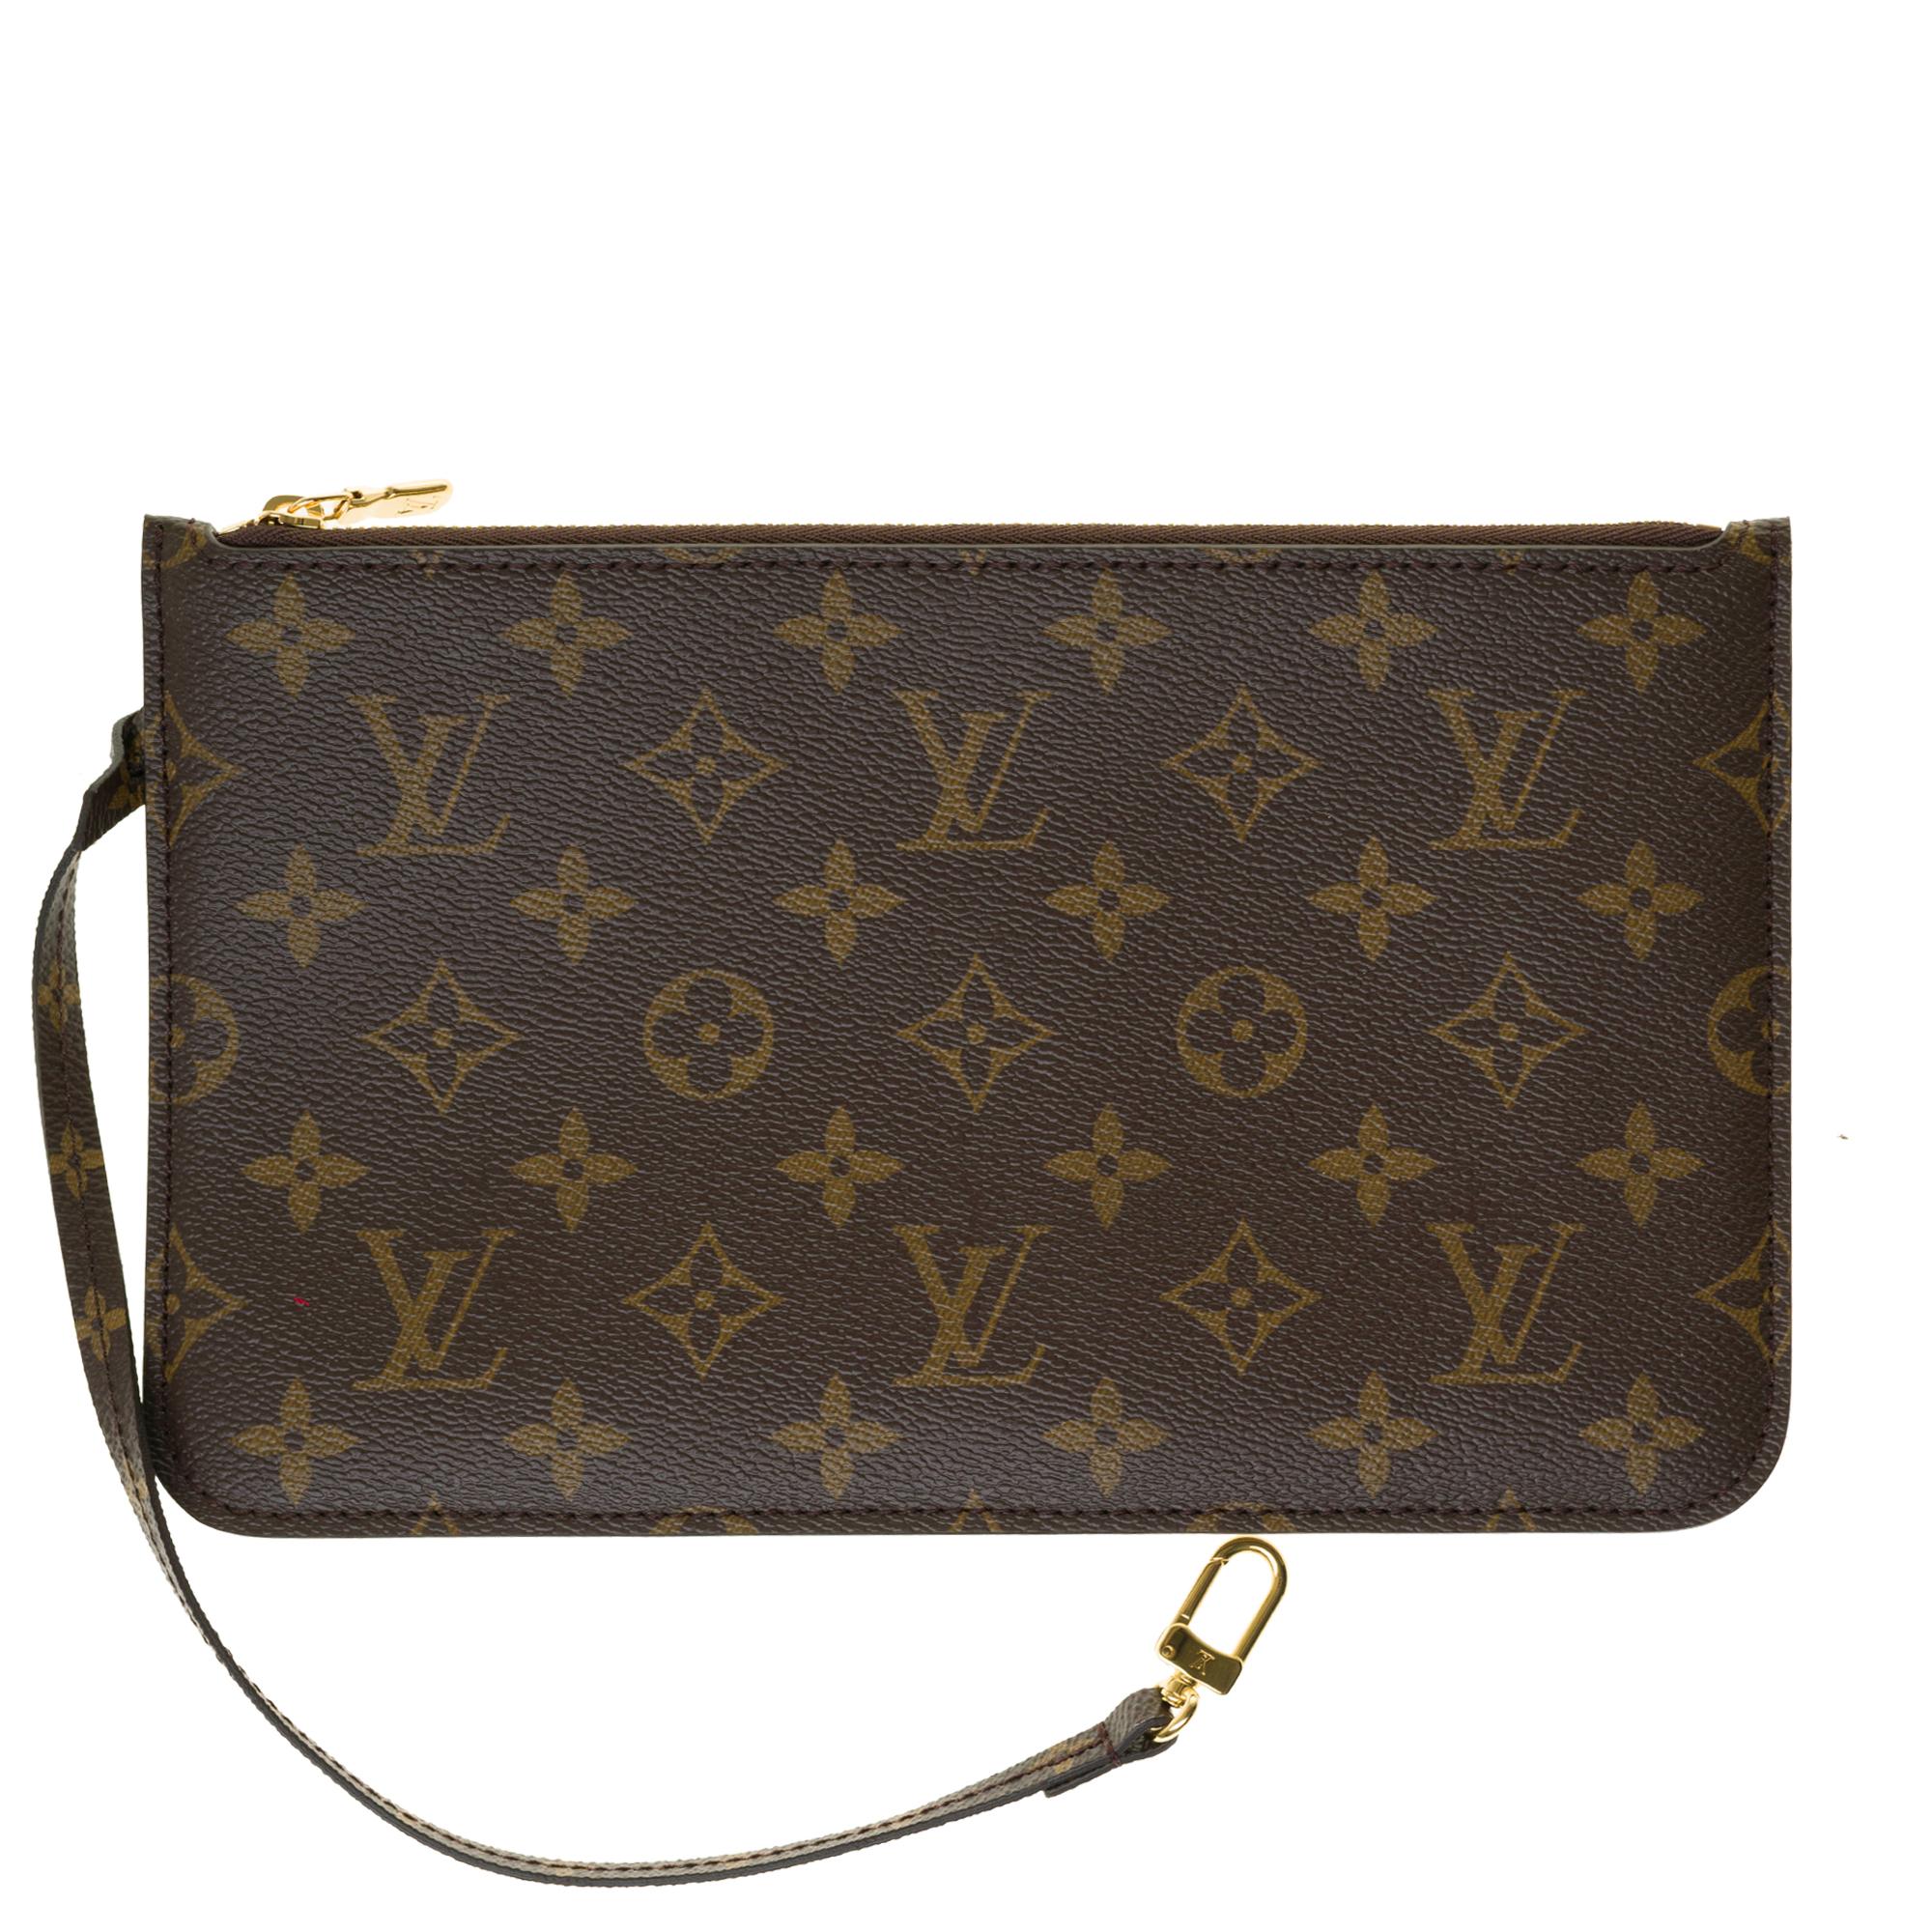 BRAND NEW Limited Edition Louis Vuitton Neverfull MM Teddy Tote 3